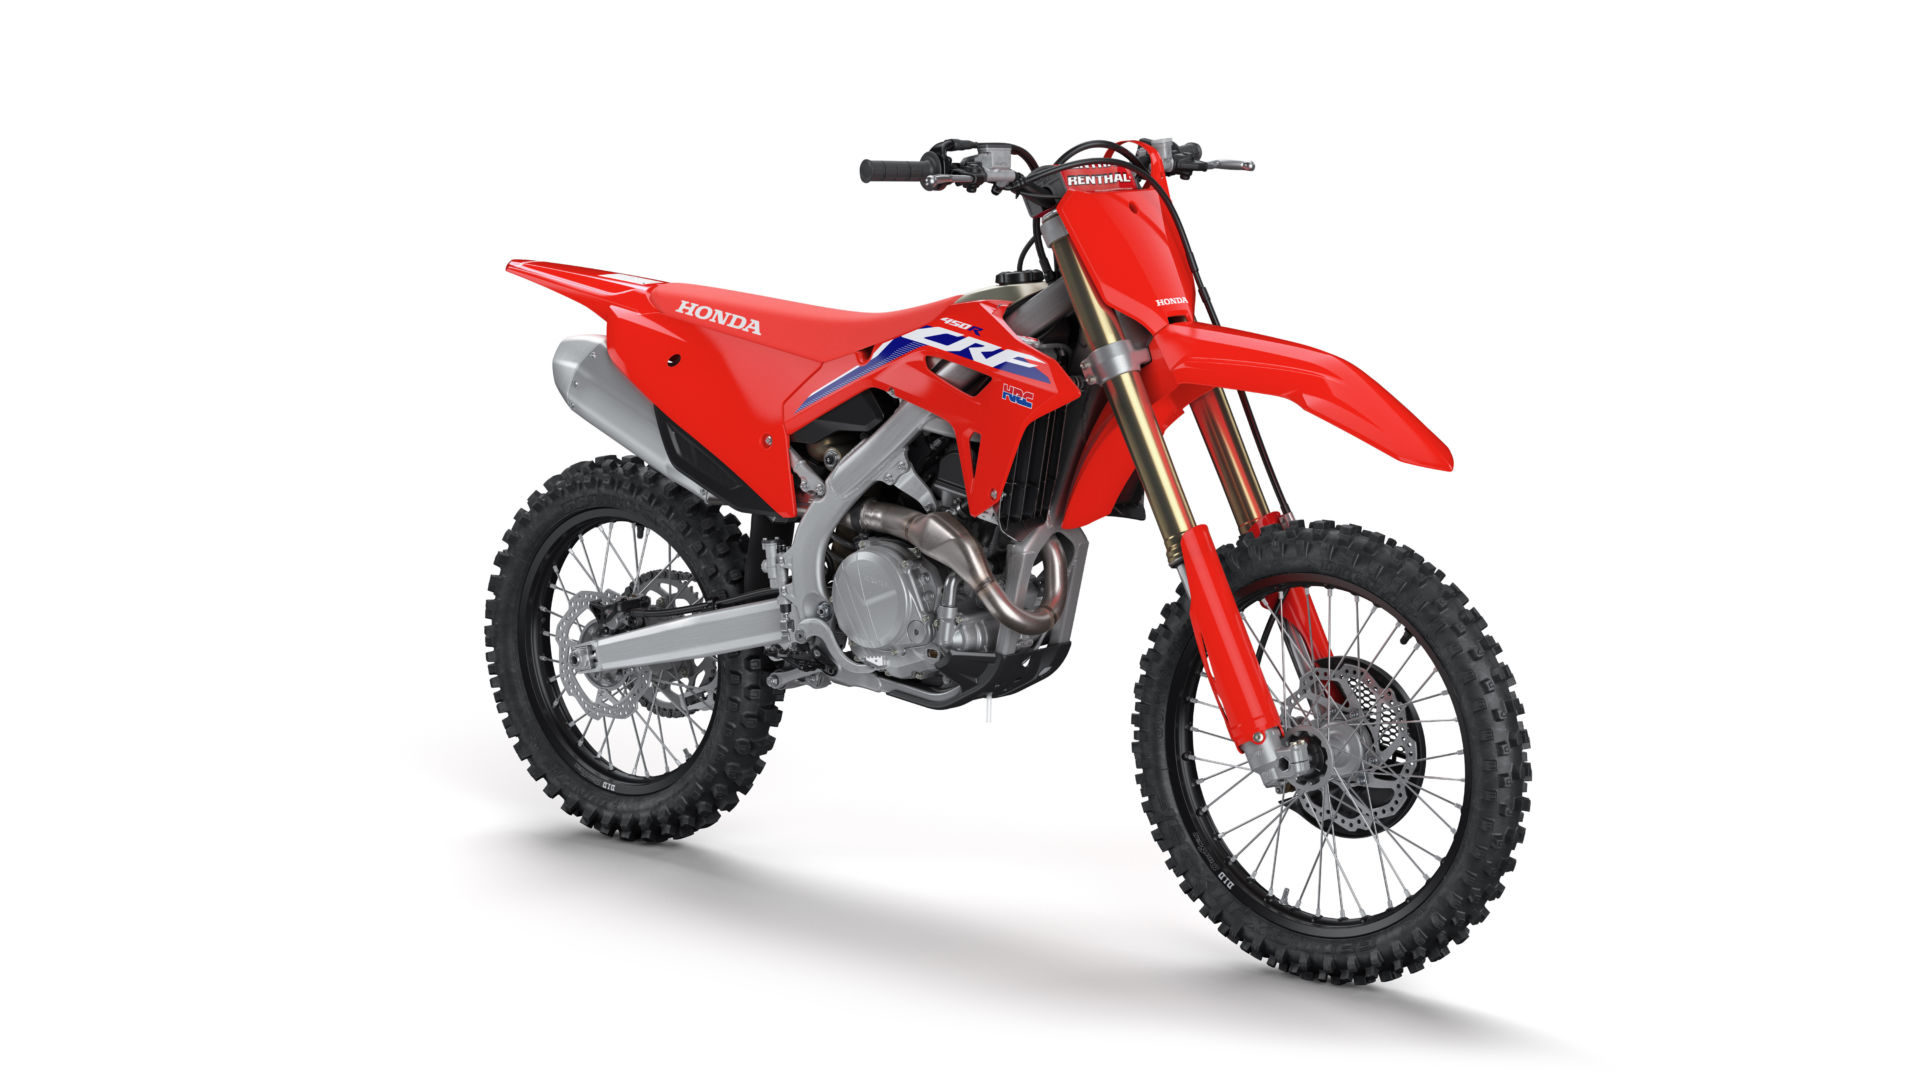 Video: Honda Introduces All New 2021 CRF450R World Magazine. Motorcycle Riding, Racing & Tech News